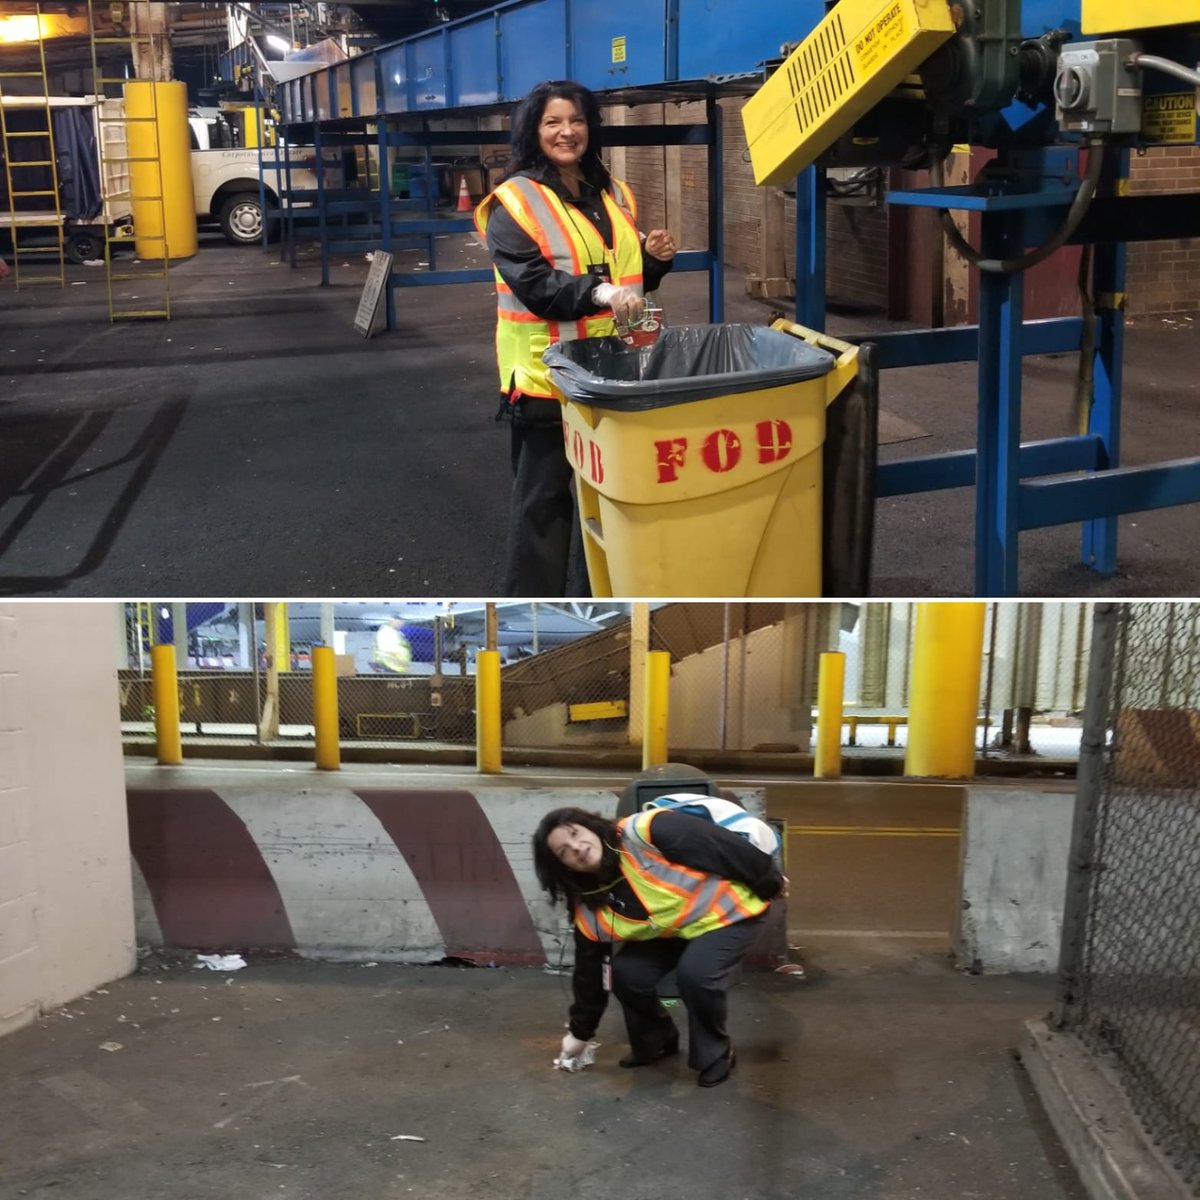 Today's EWR SOC morning FOD pick-up. 'FOD pick-up is everyone's business and good for our business!' With @tmorv13 , Kay and Sherron... #beingUnited @AOSafetyUAL @EWR_AOSafety #UAEWRAO